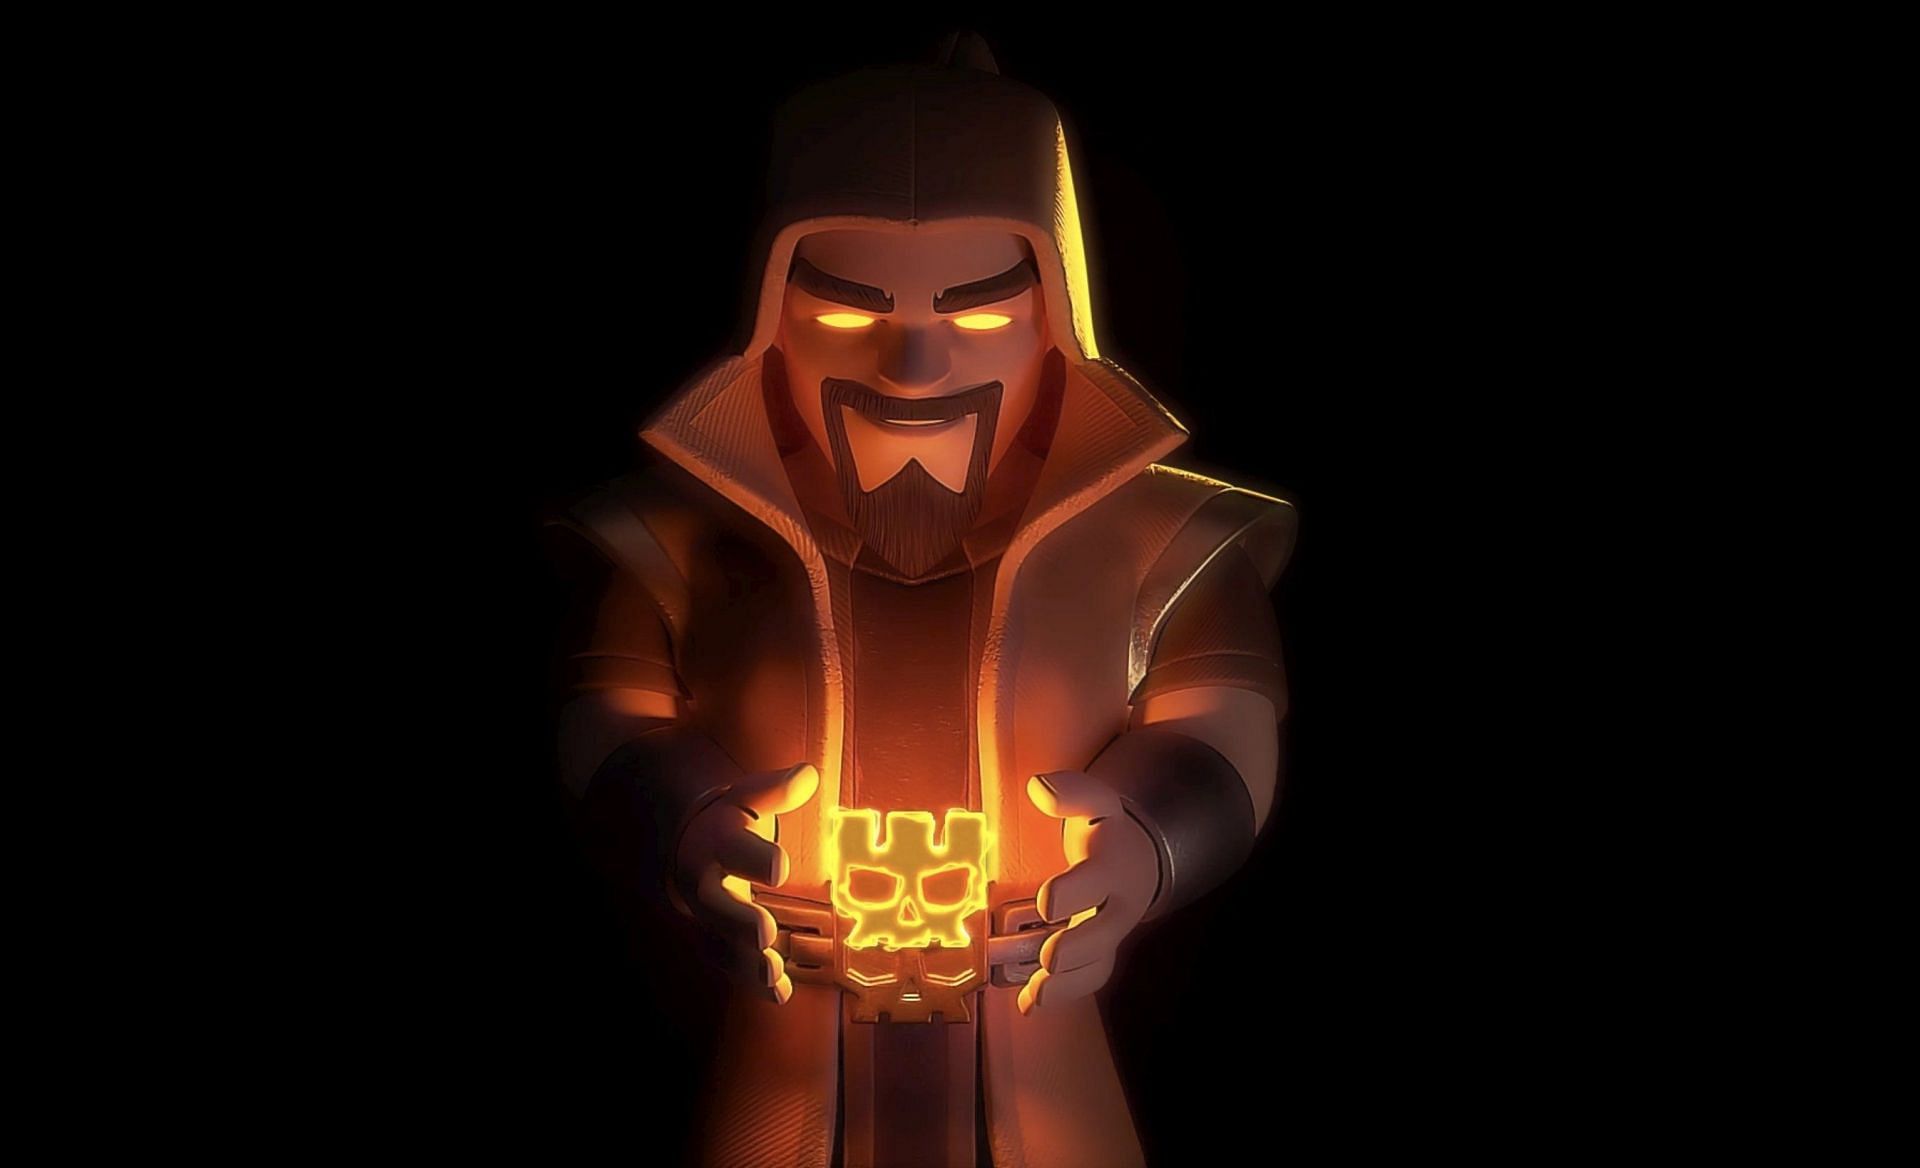 Wizard (Image via Supercell)